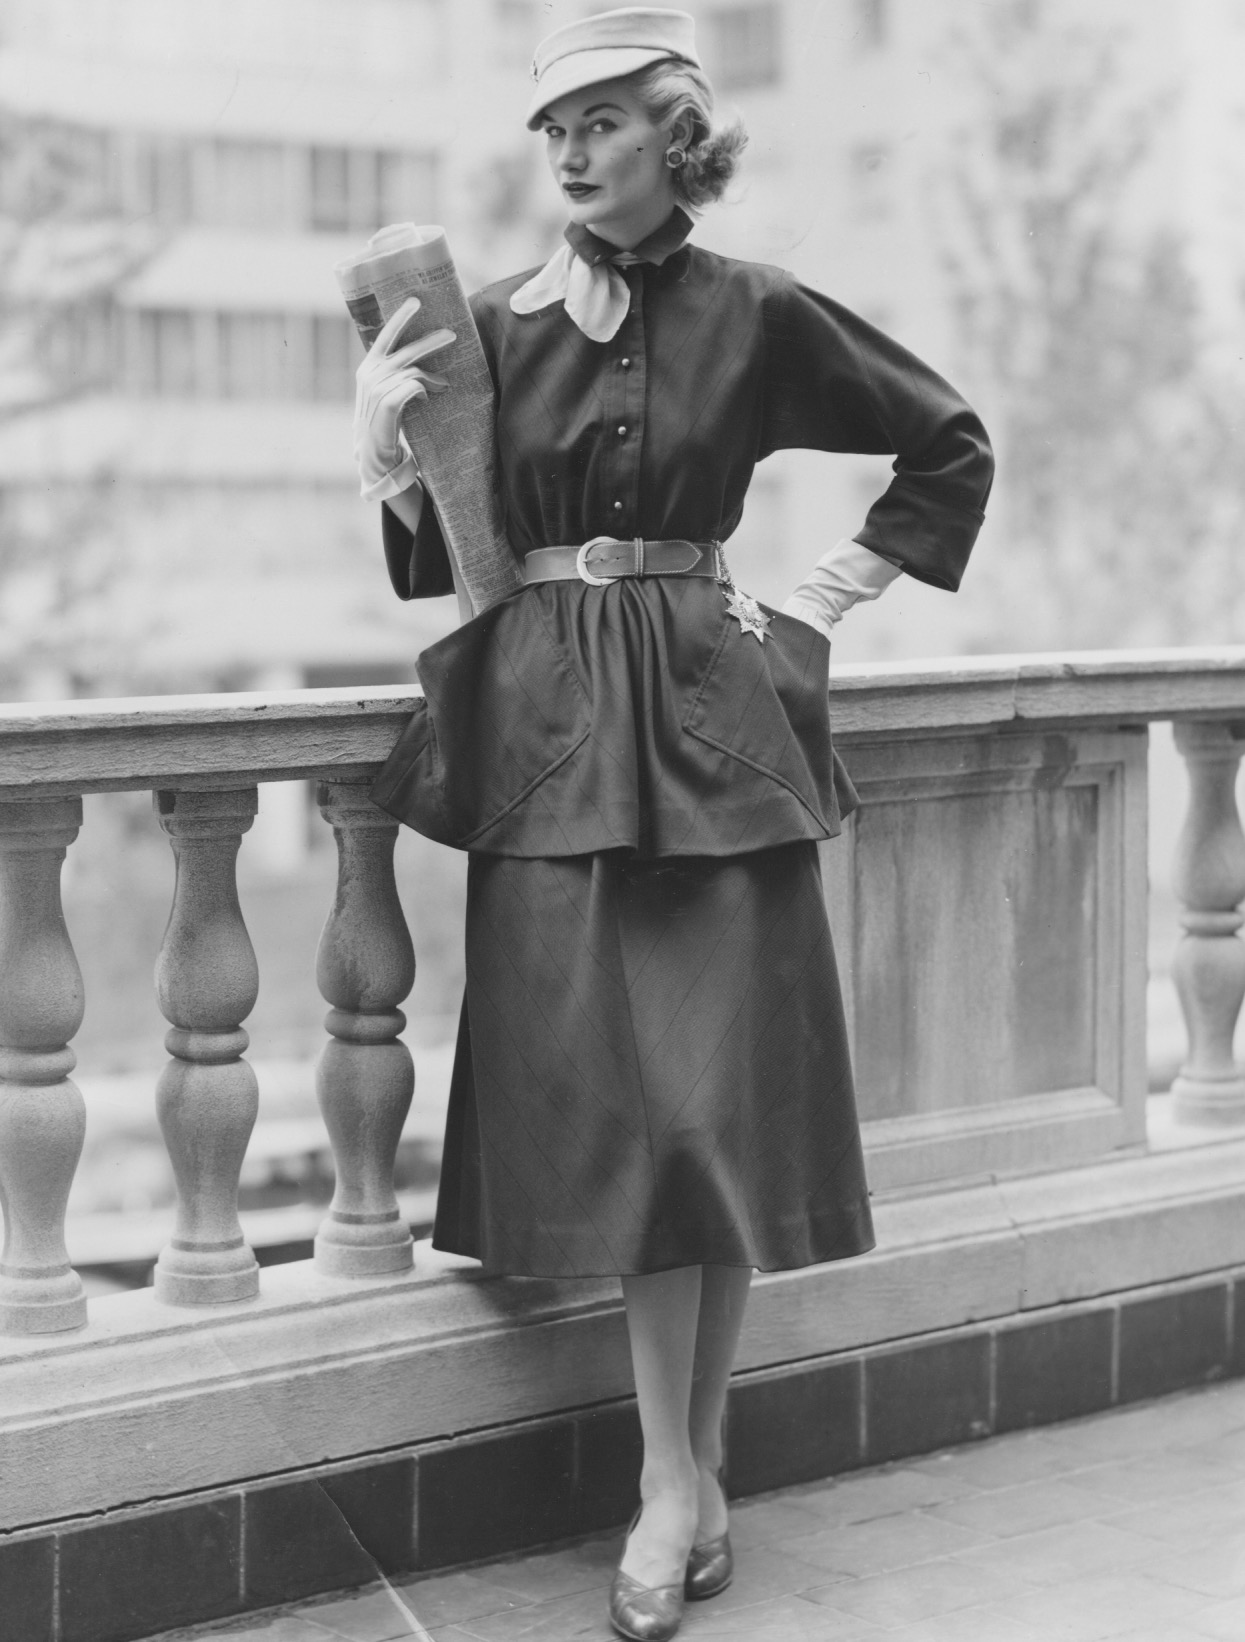 claire mccardell – The Vintage Fashion Librarian